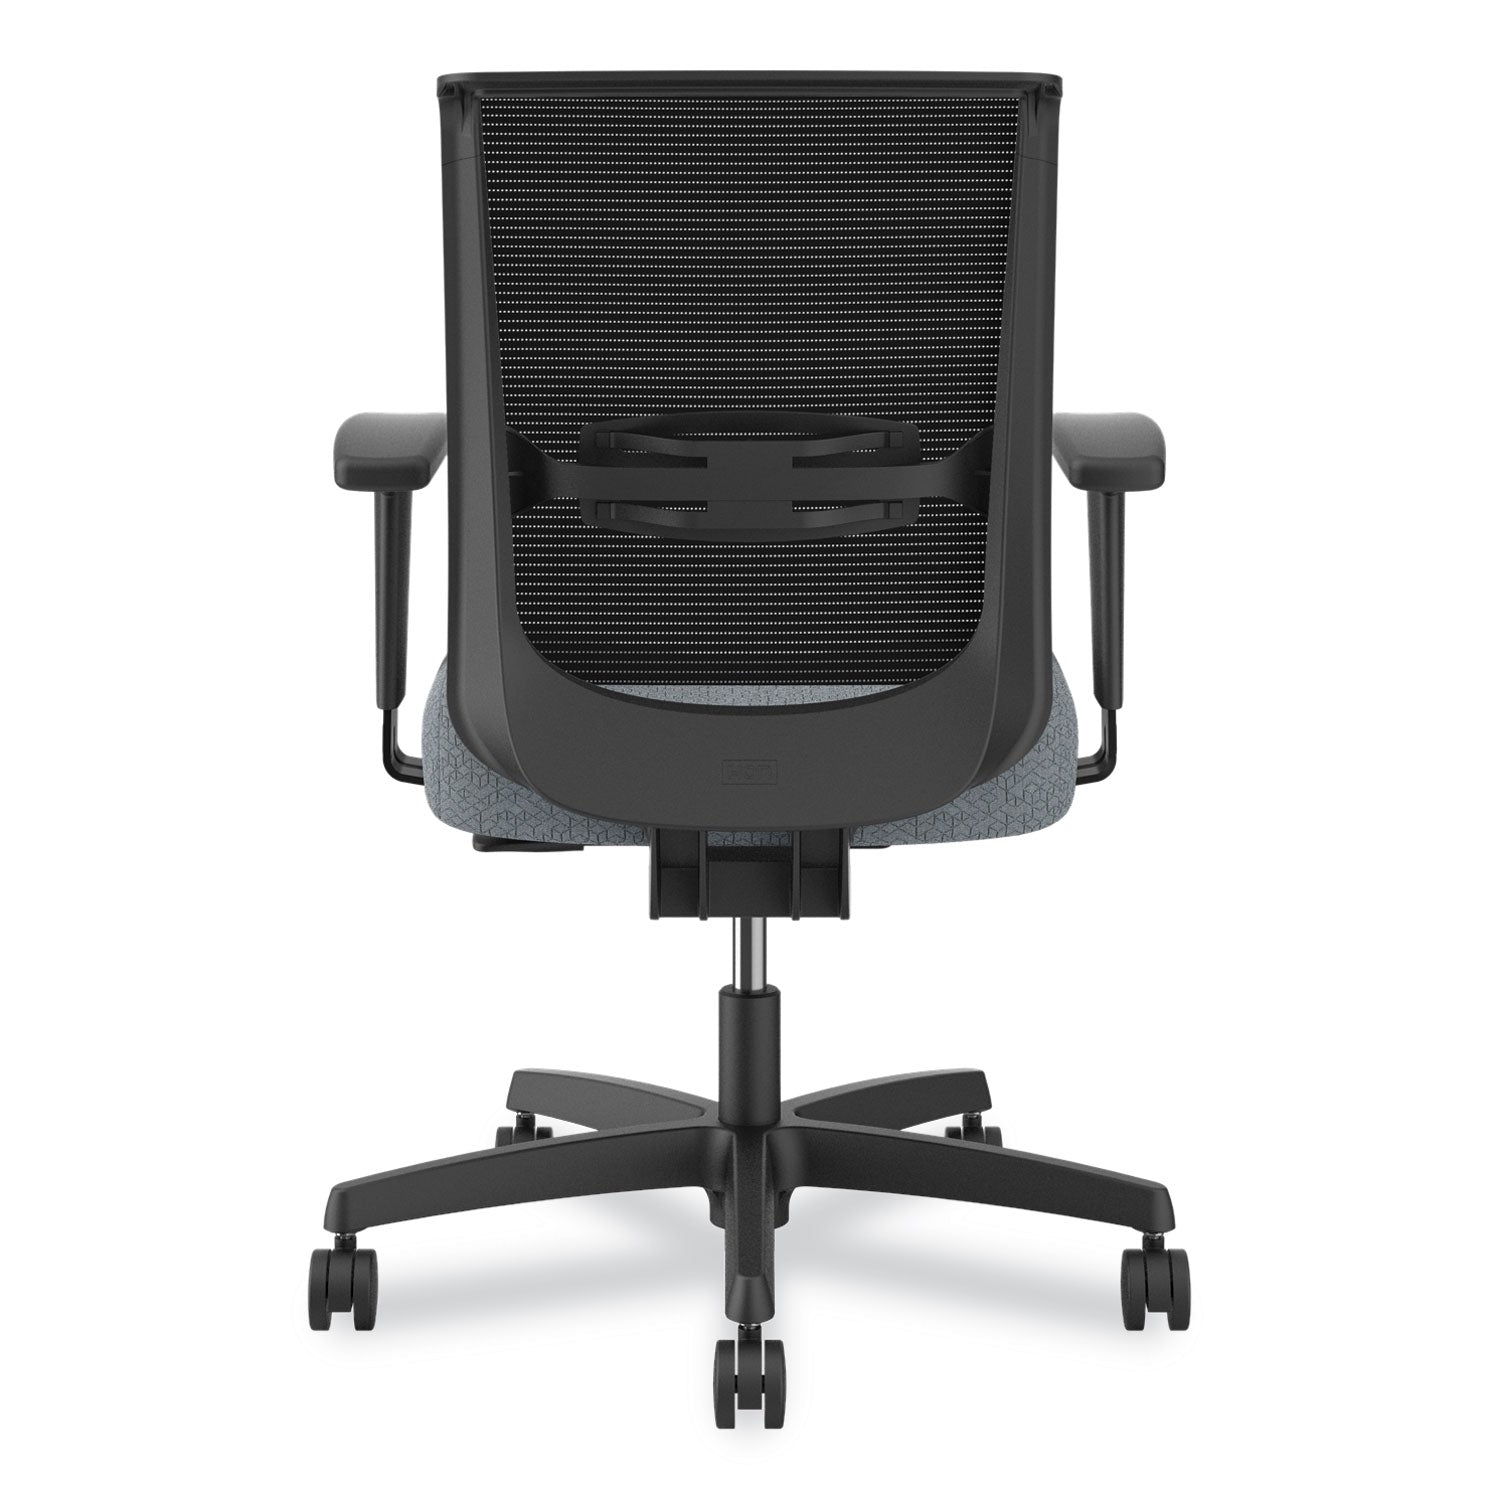 convergence-mid-back-task-chair-up-to-275-lb-165-to-21-seat-ht-basalt-seat-black-back-frame-ships-in-7-10-bus-days_honcmy1aapx25 - 4